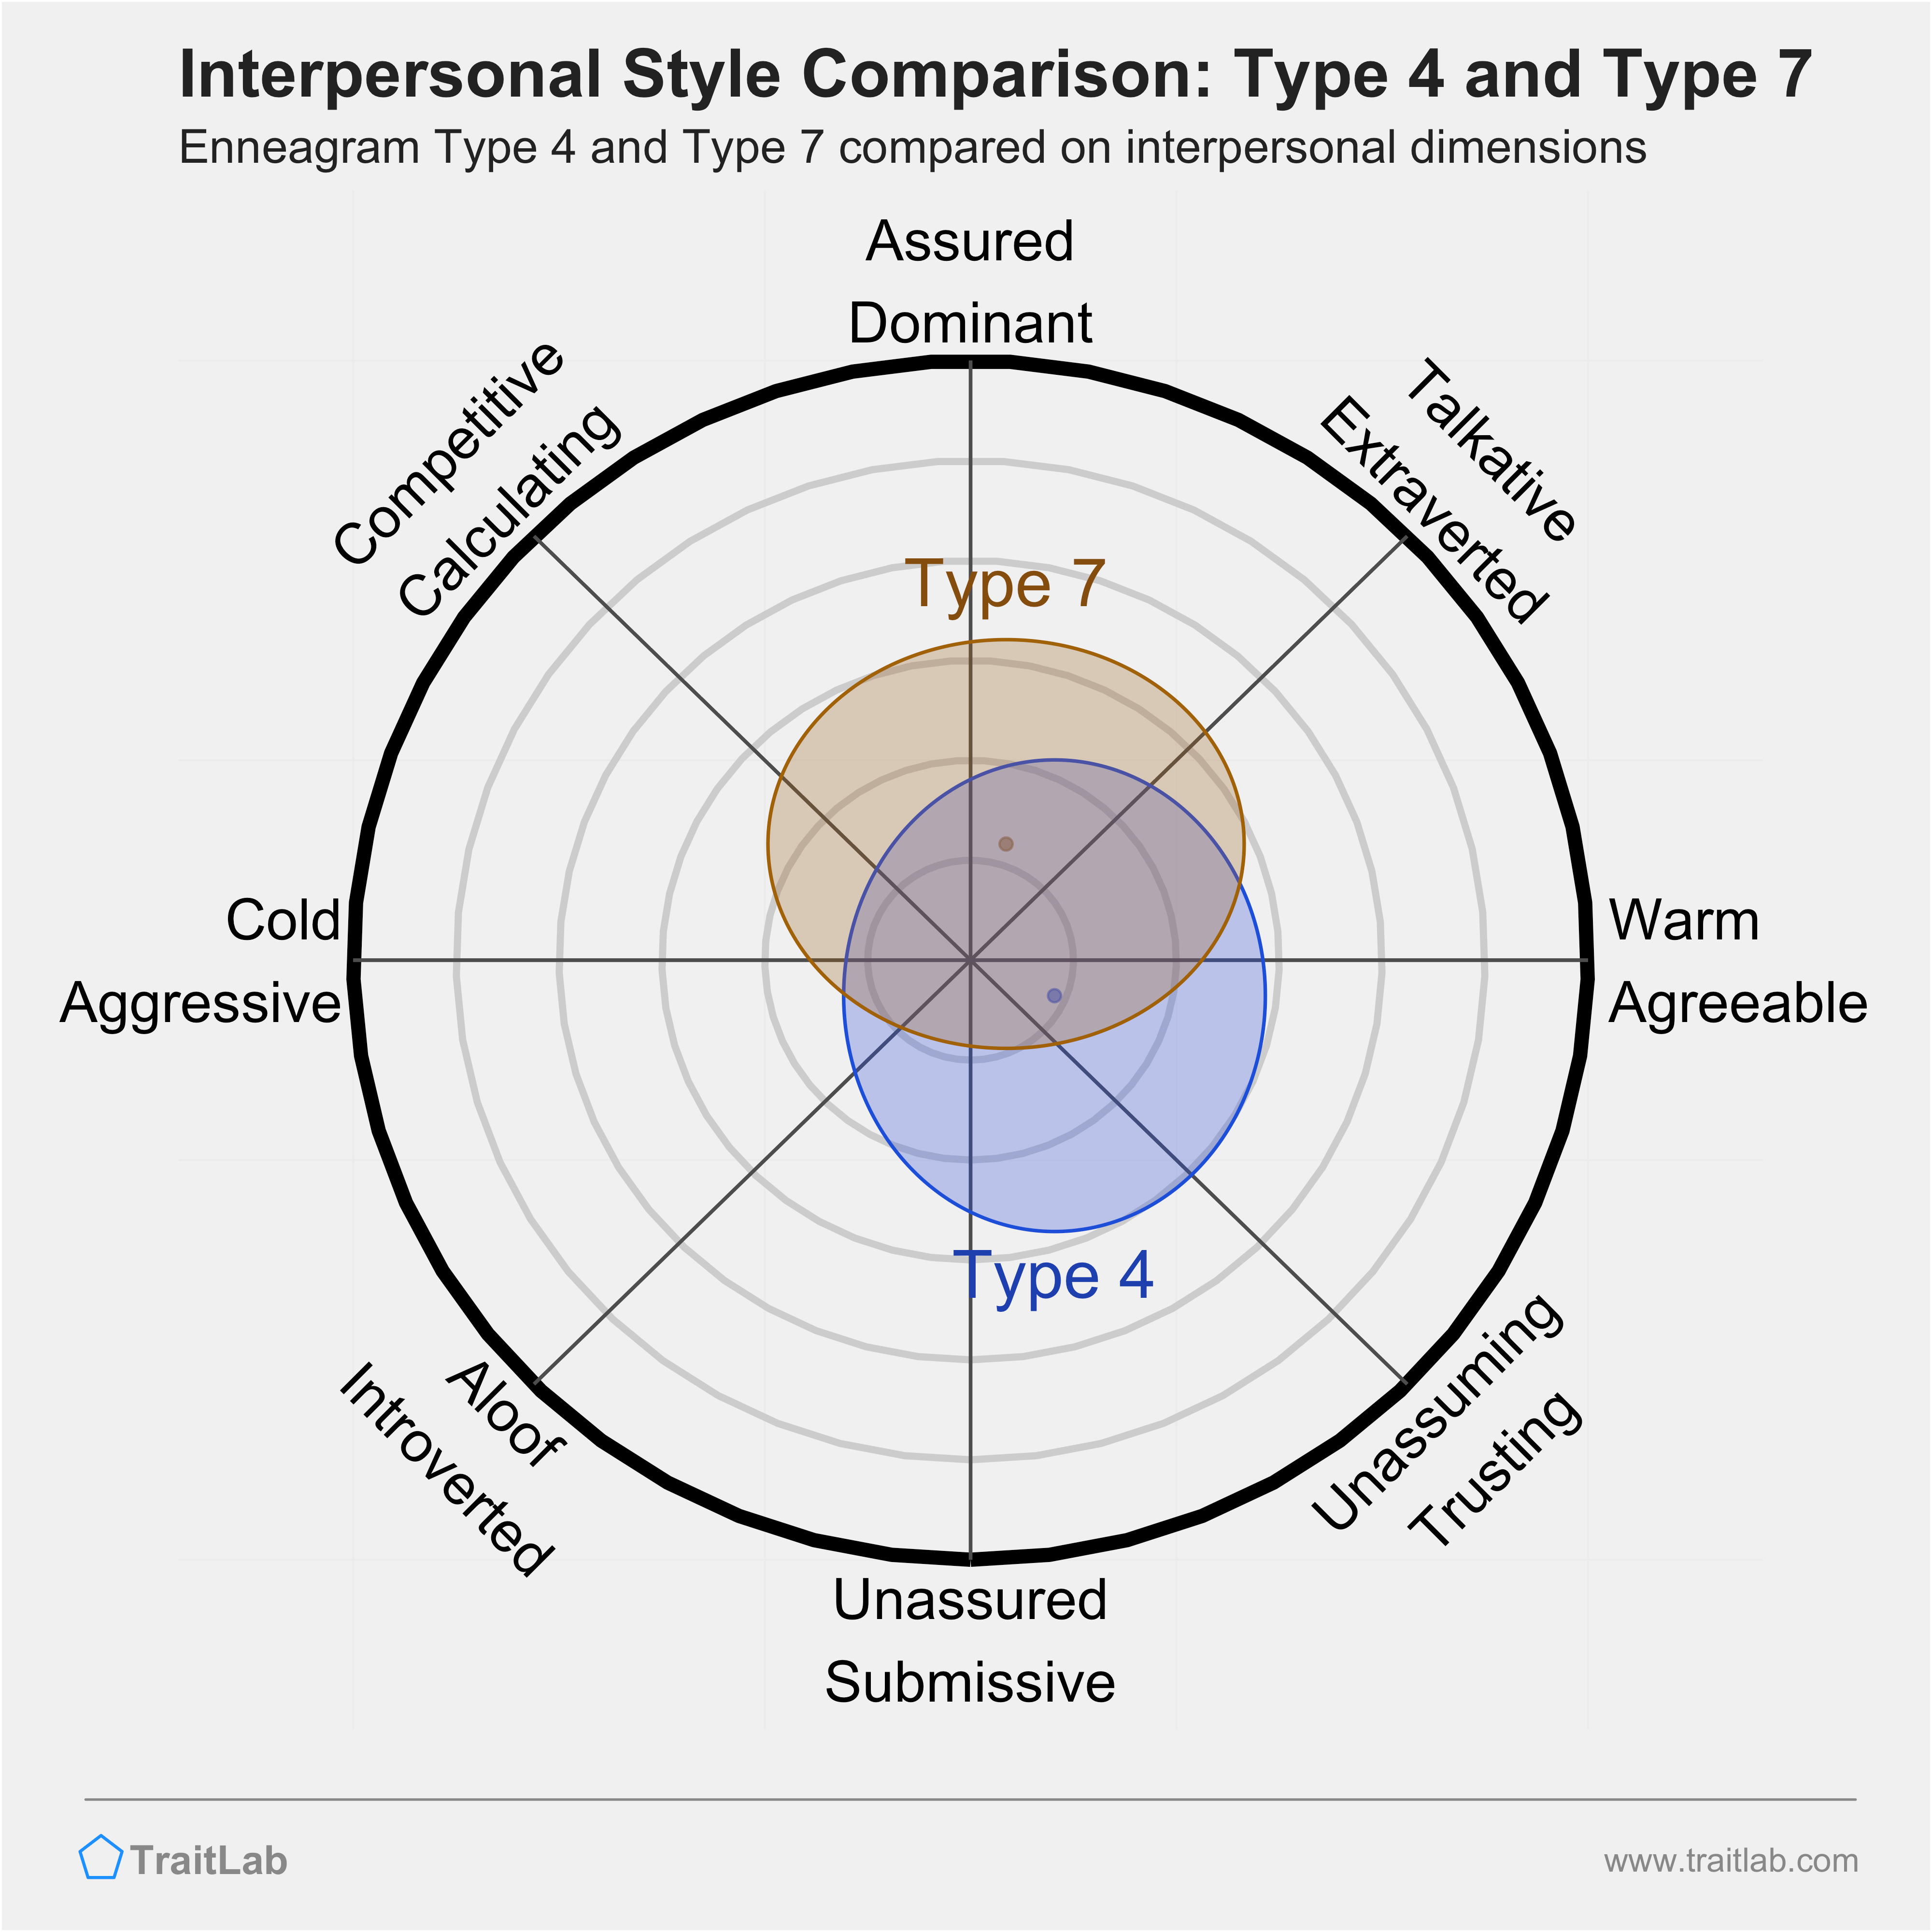 Enneagram Type 4 and Type 7 comparison across interpersonal dimensions